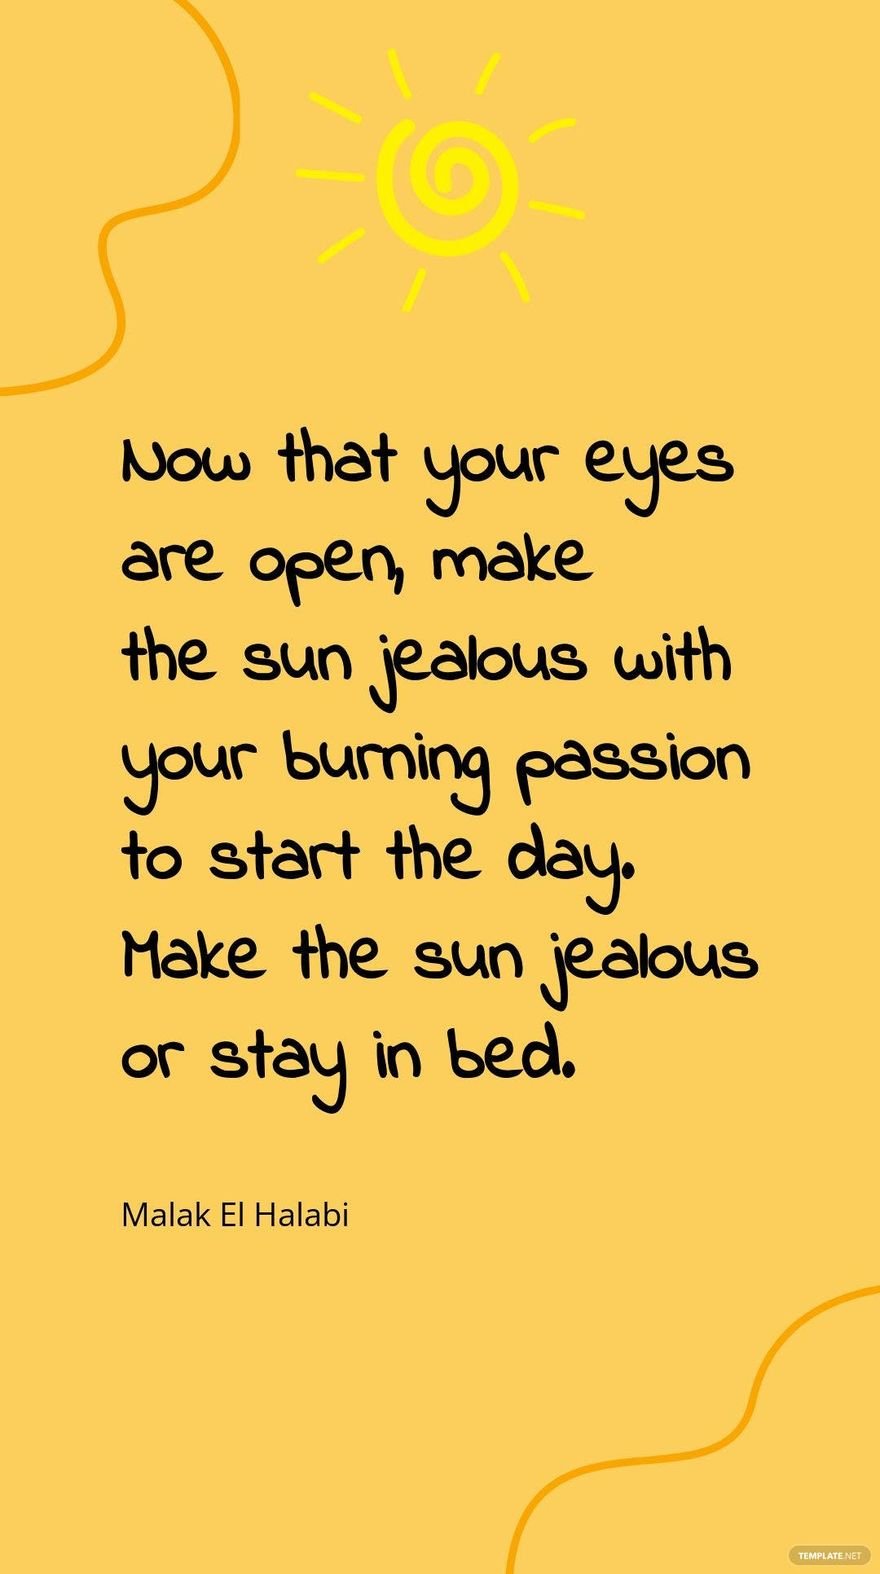 Malak El Halabi - Now that your eyes are open, make the sun jealous with your burning passion to start the day. Make the sun jealous or stay in bed.